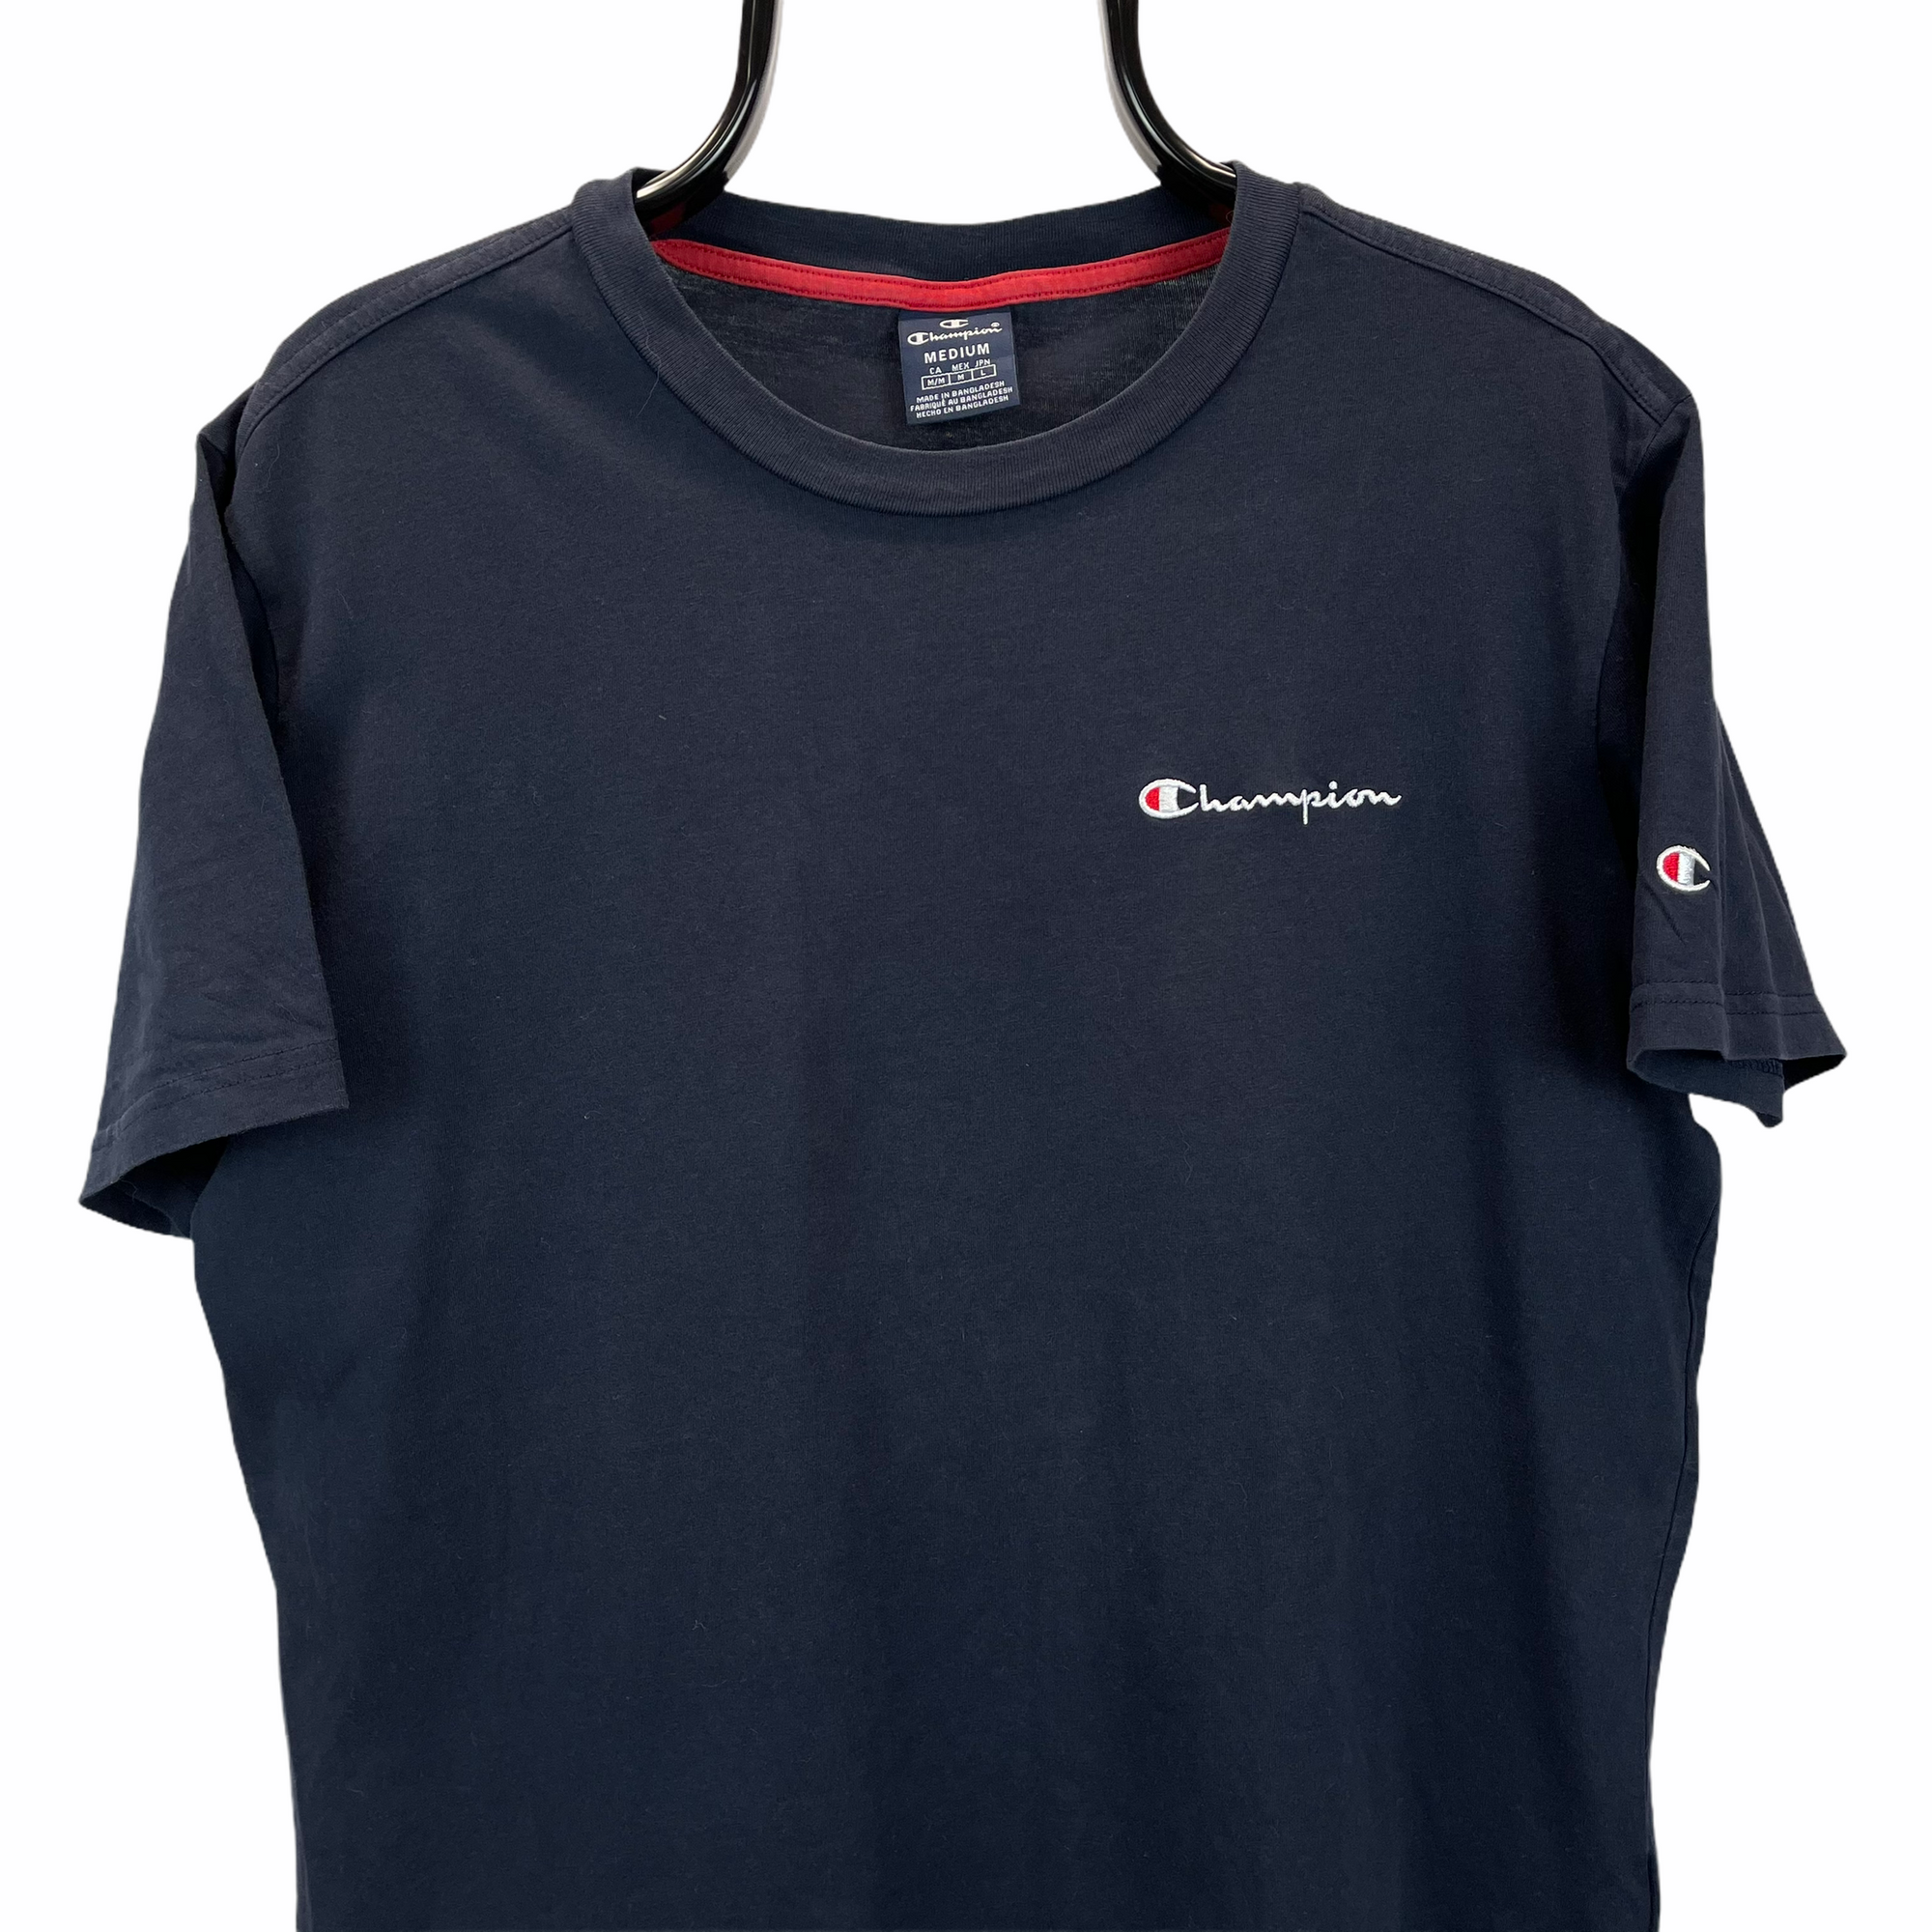 CHAMPION EMBROIDERED SMALL SPELLOUT TEE IN NAVY - MEN'S MEDIUM/WOMEN'S LARGE